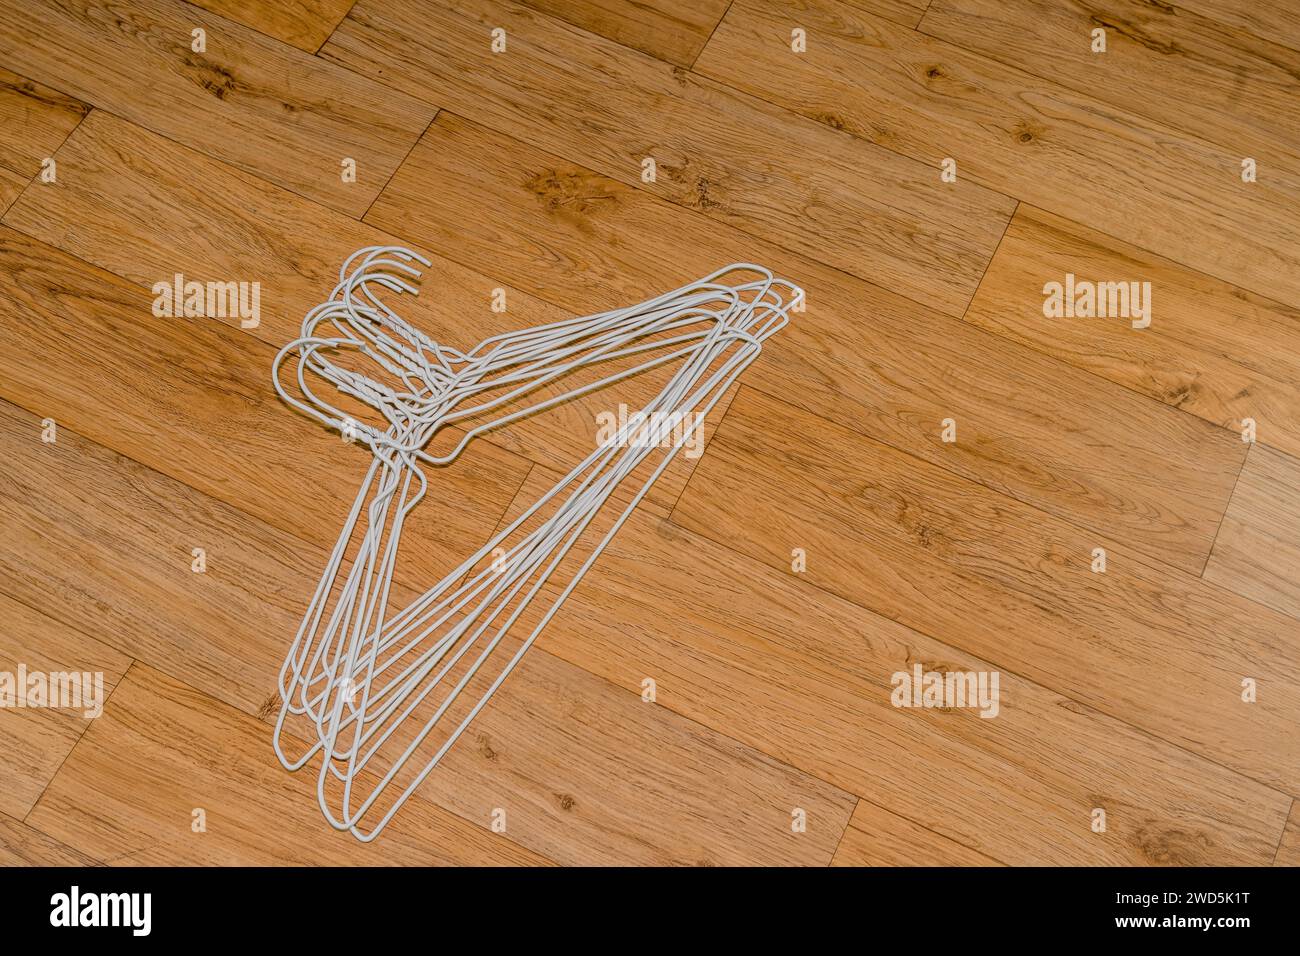 Stack of white wire clothes hangers laying on wood grain background, South Korea Stock Photo